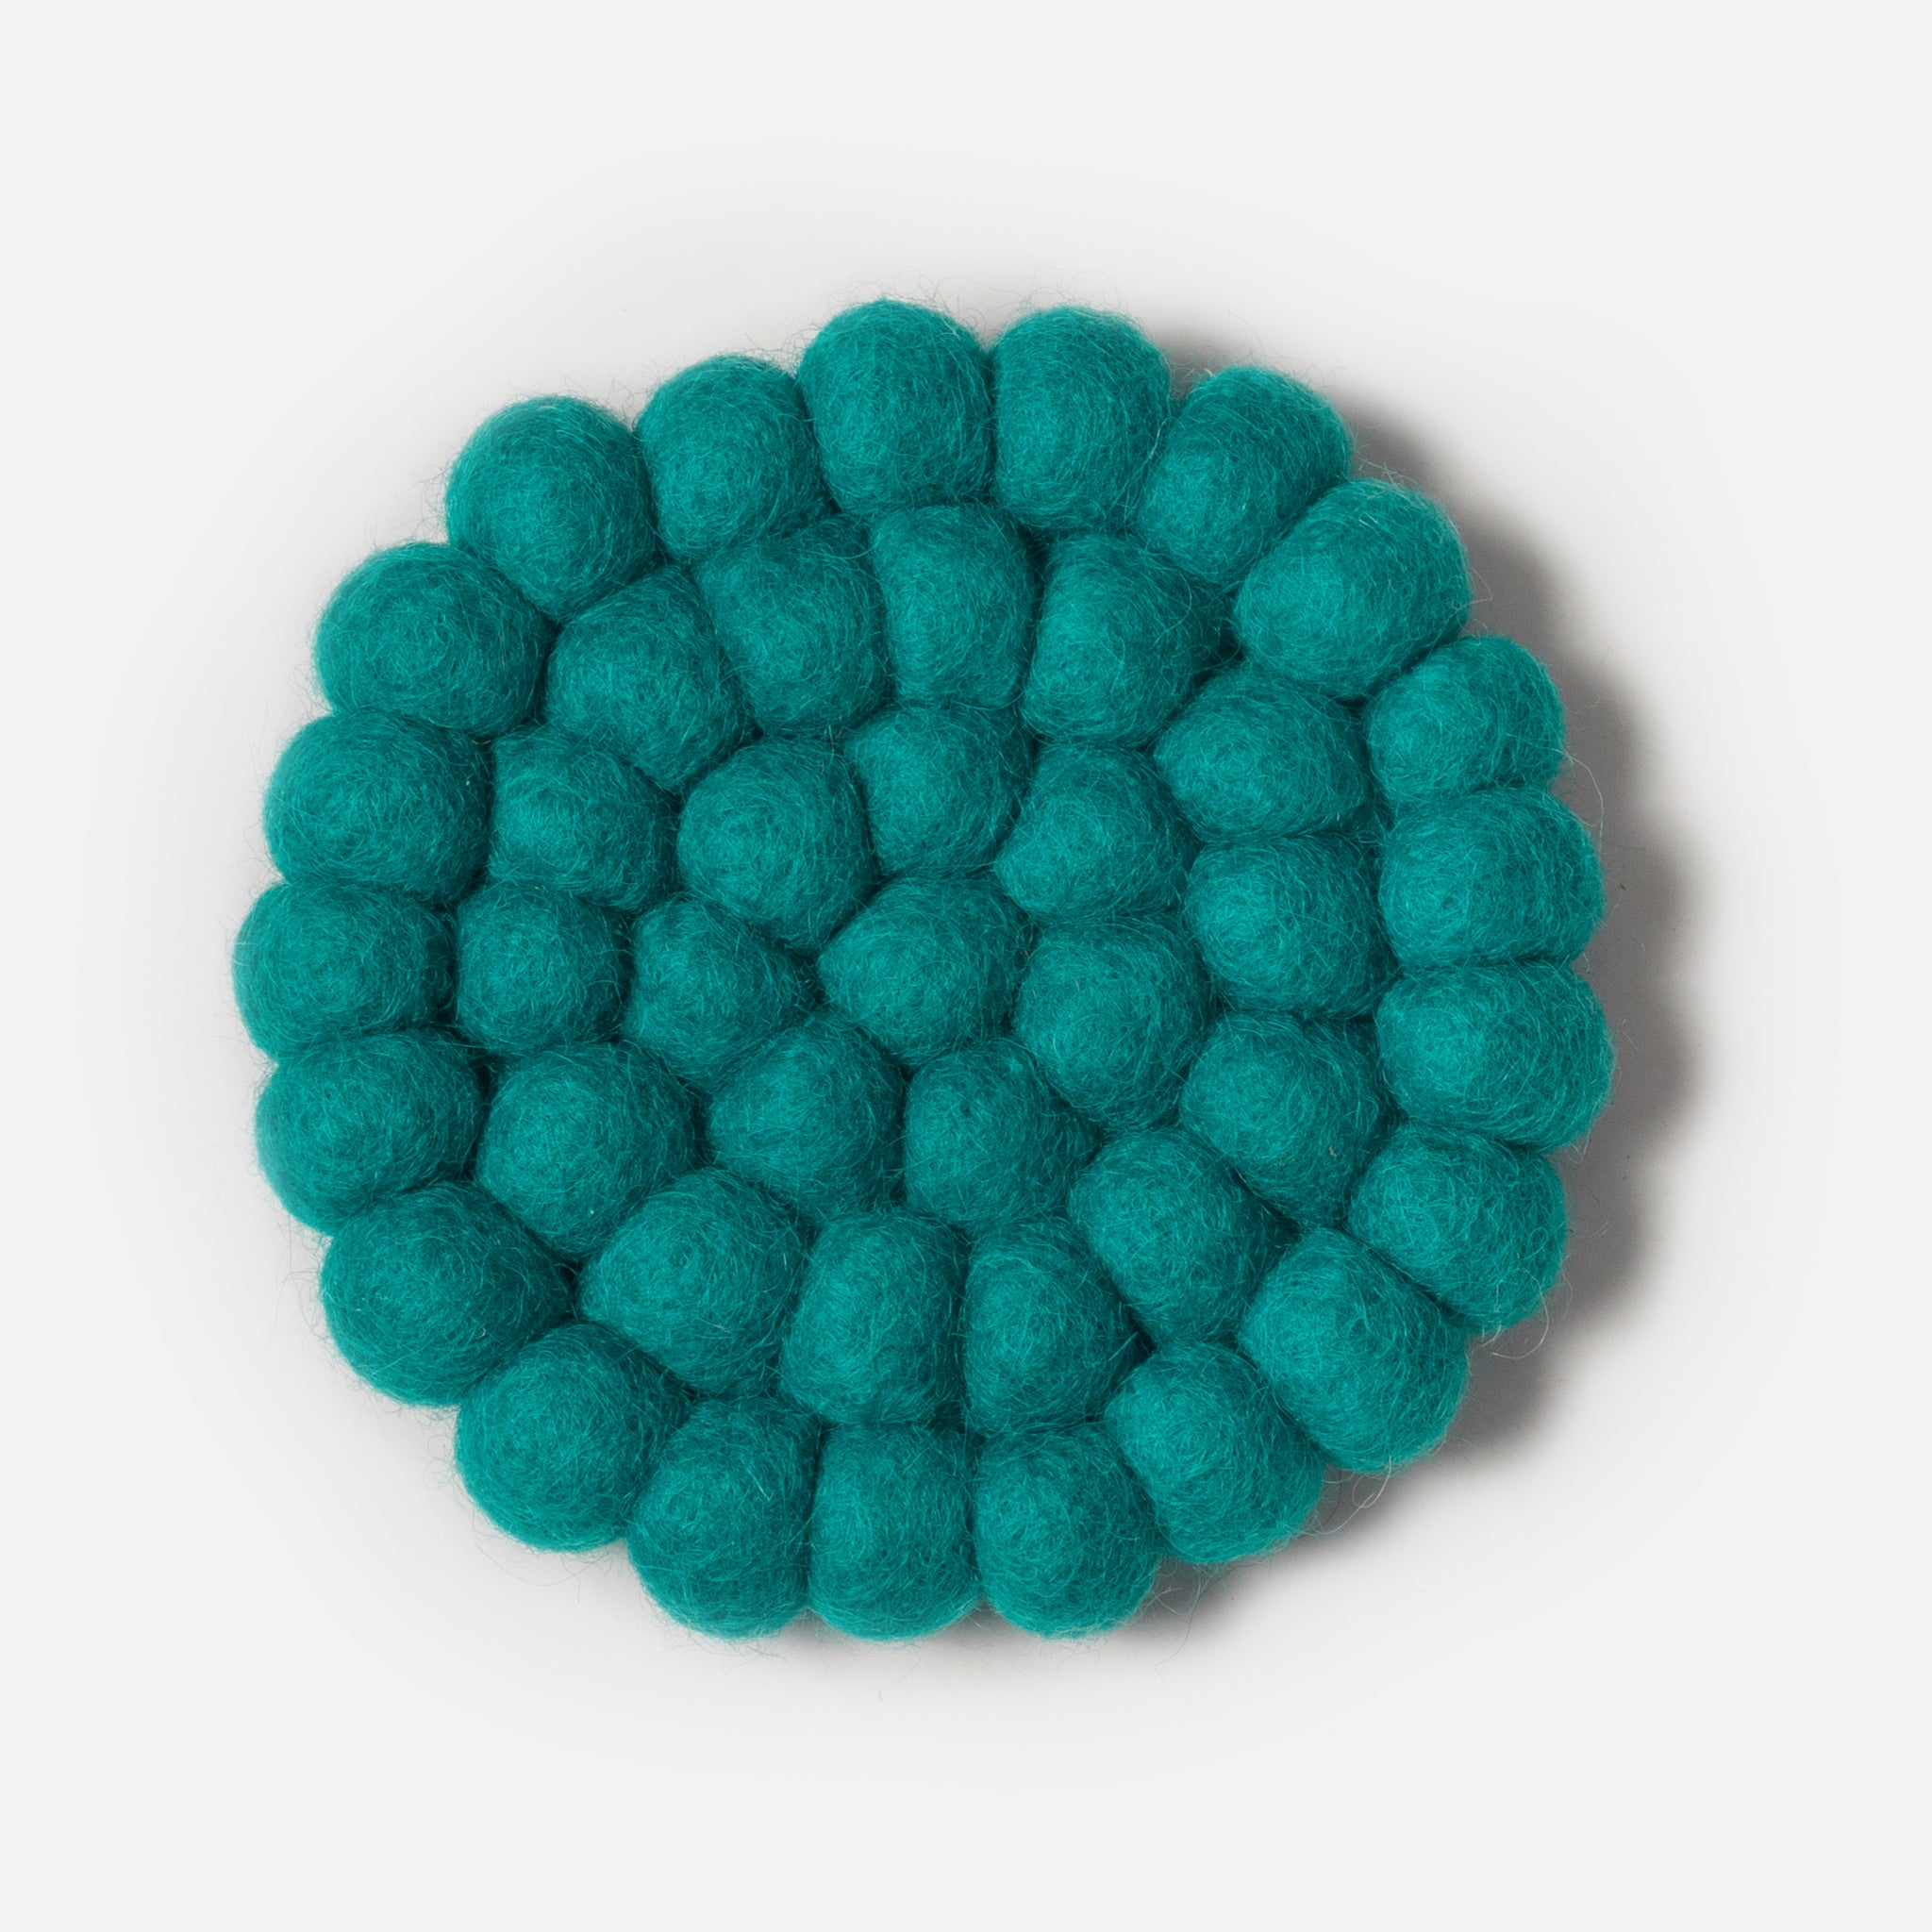 Round small felt coaster which is made from little felt balls. The color is turquoise.